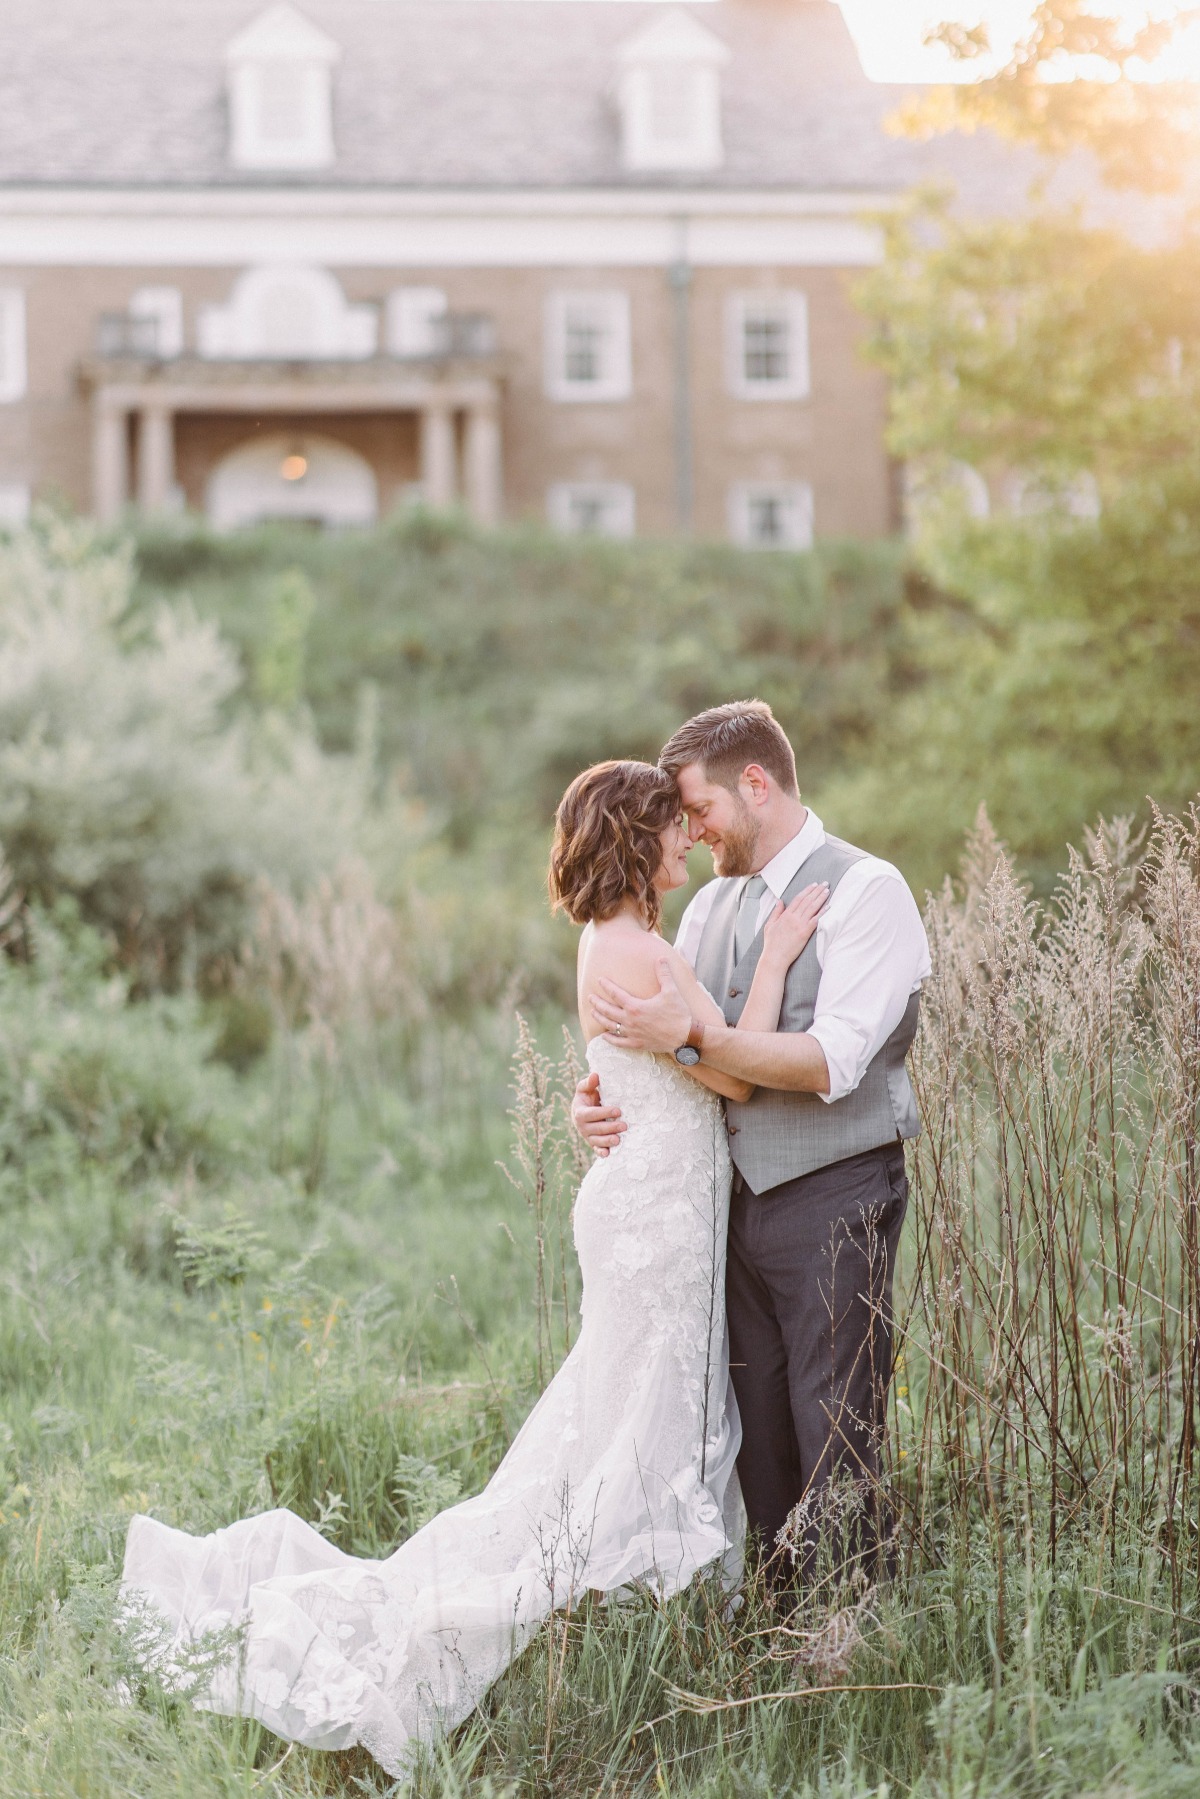 Charming Church Wedding That's All About Family